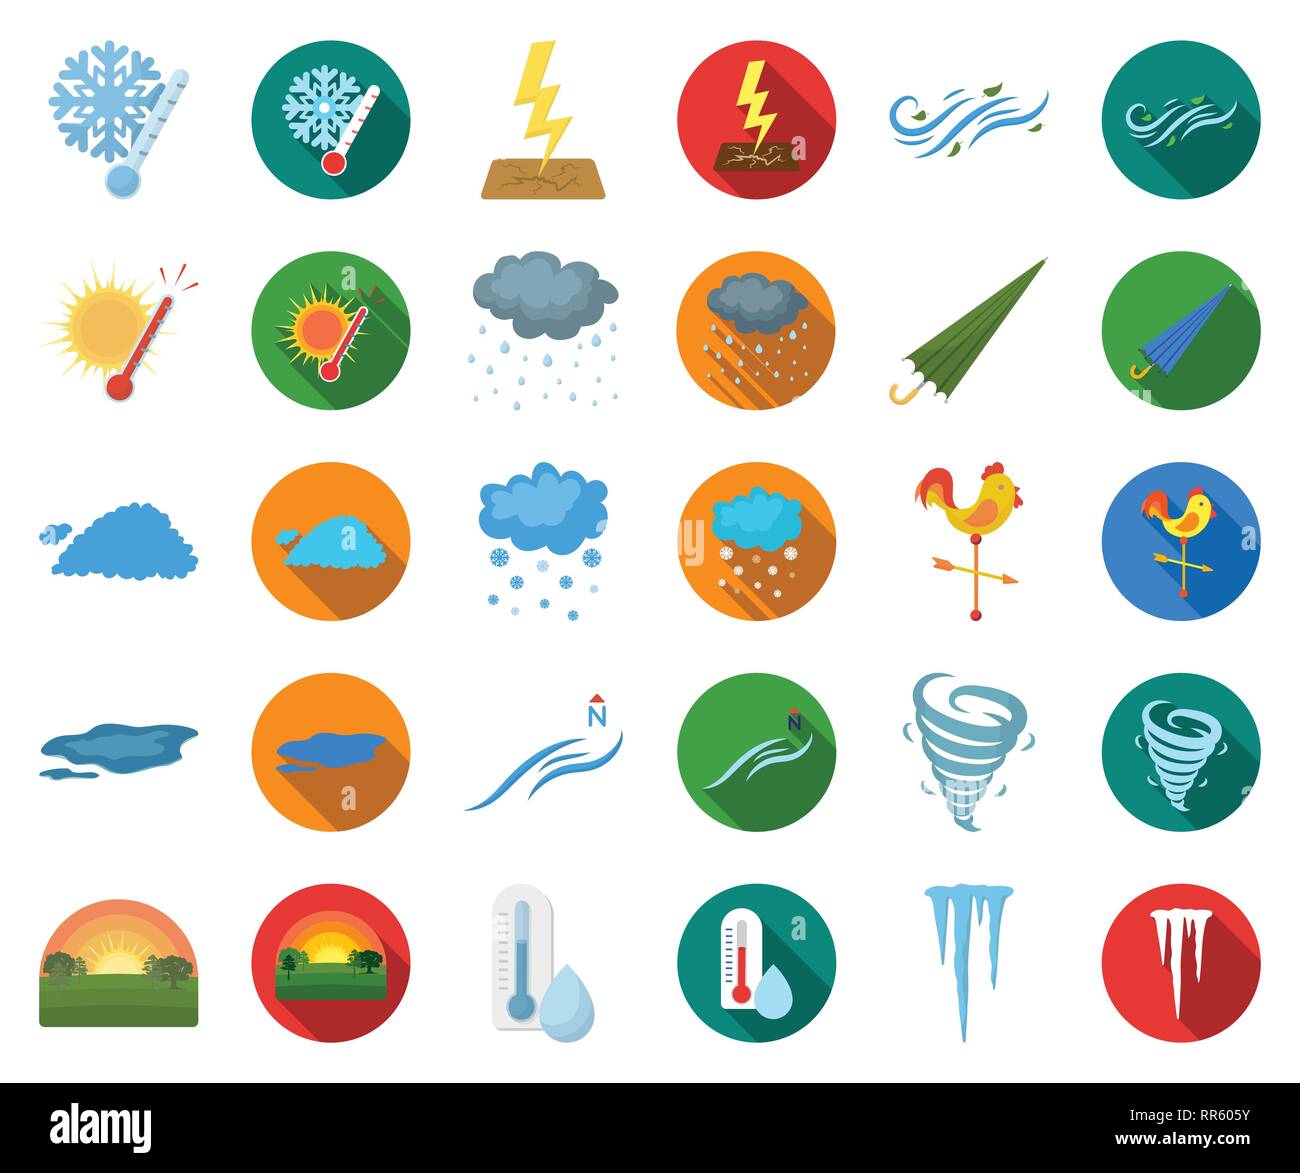 art,atmosphere,cartoon,flat,characteristics,clear,cloud,cloudy,cold,collection,cyclone,damp,day,design,different,frost,heat,icicles,icon,illustration,isolated,lightning,logo,meteorology,northern,precipitation,puddle,rain,rainy,season,set,sign,snowfall  ...